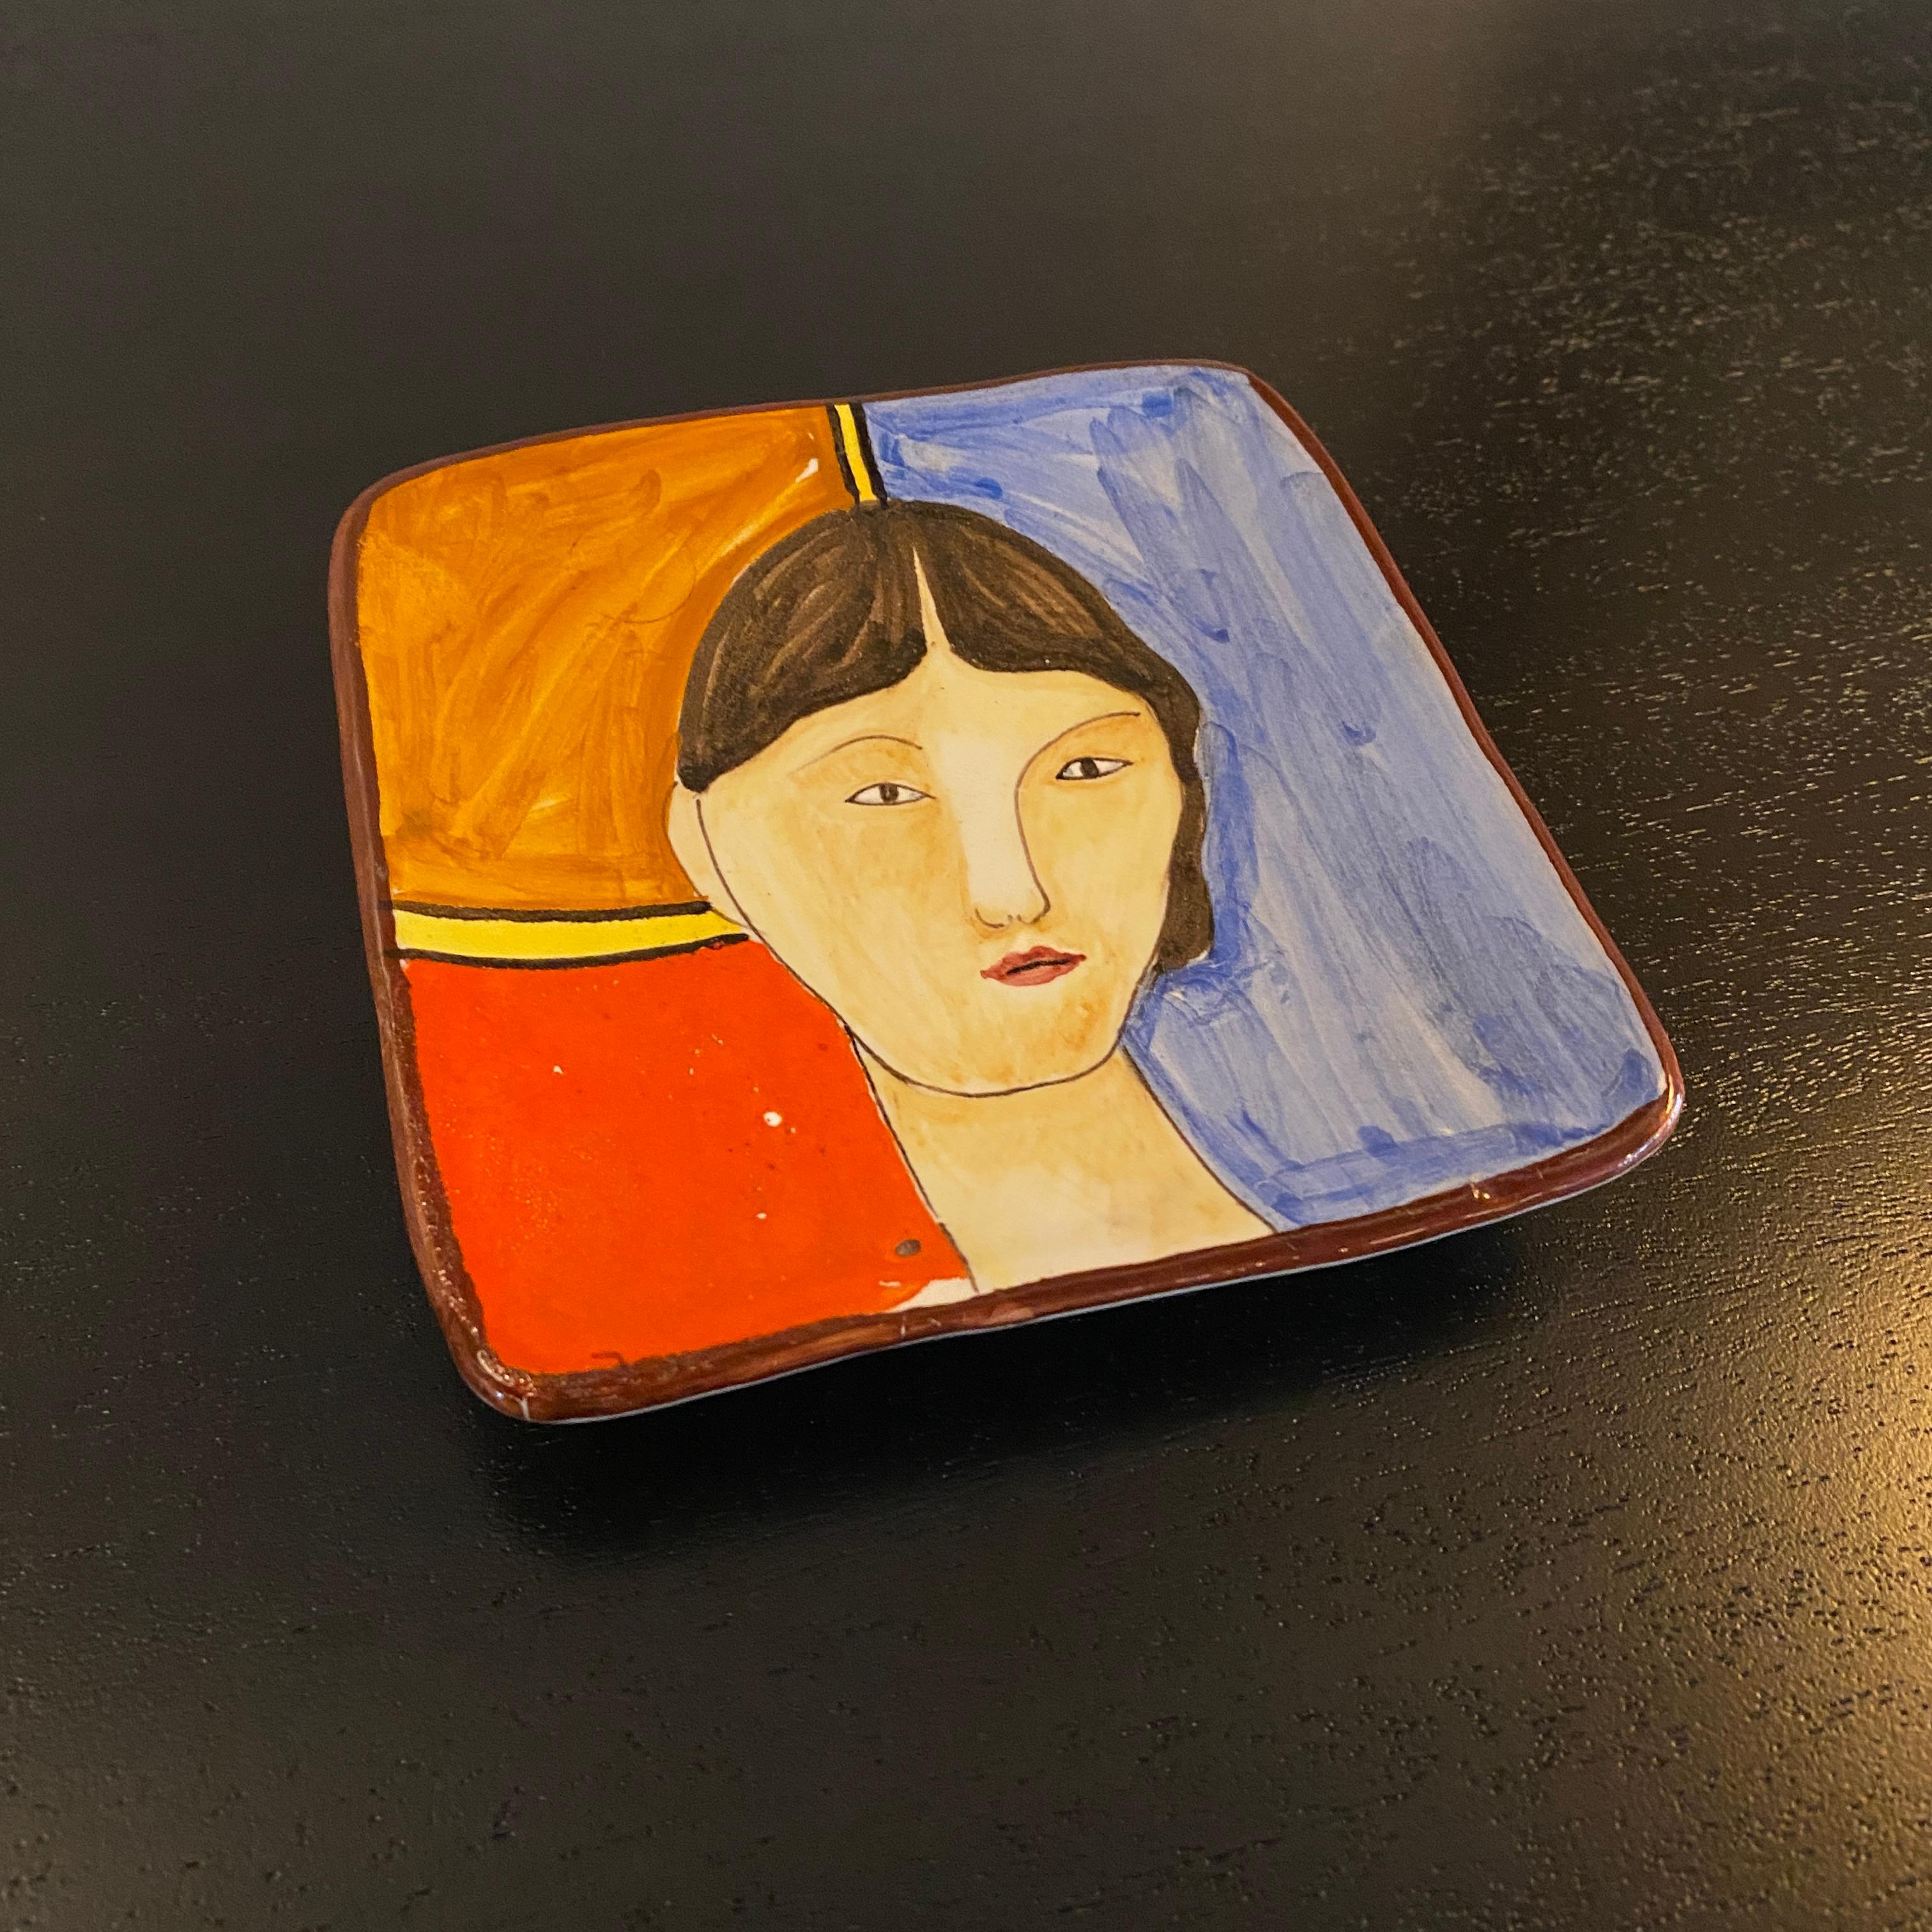 Lovely, Italian mid century modern, hand painted ceramic, pin tray, ring holder or decorative dish by Santucci Deruta features a female portrait against a color-block background of blue, red and orange. It's a playful accent that brings a bright pop